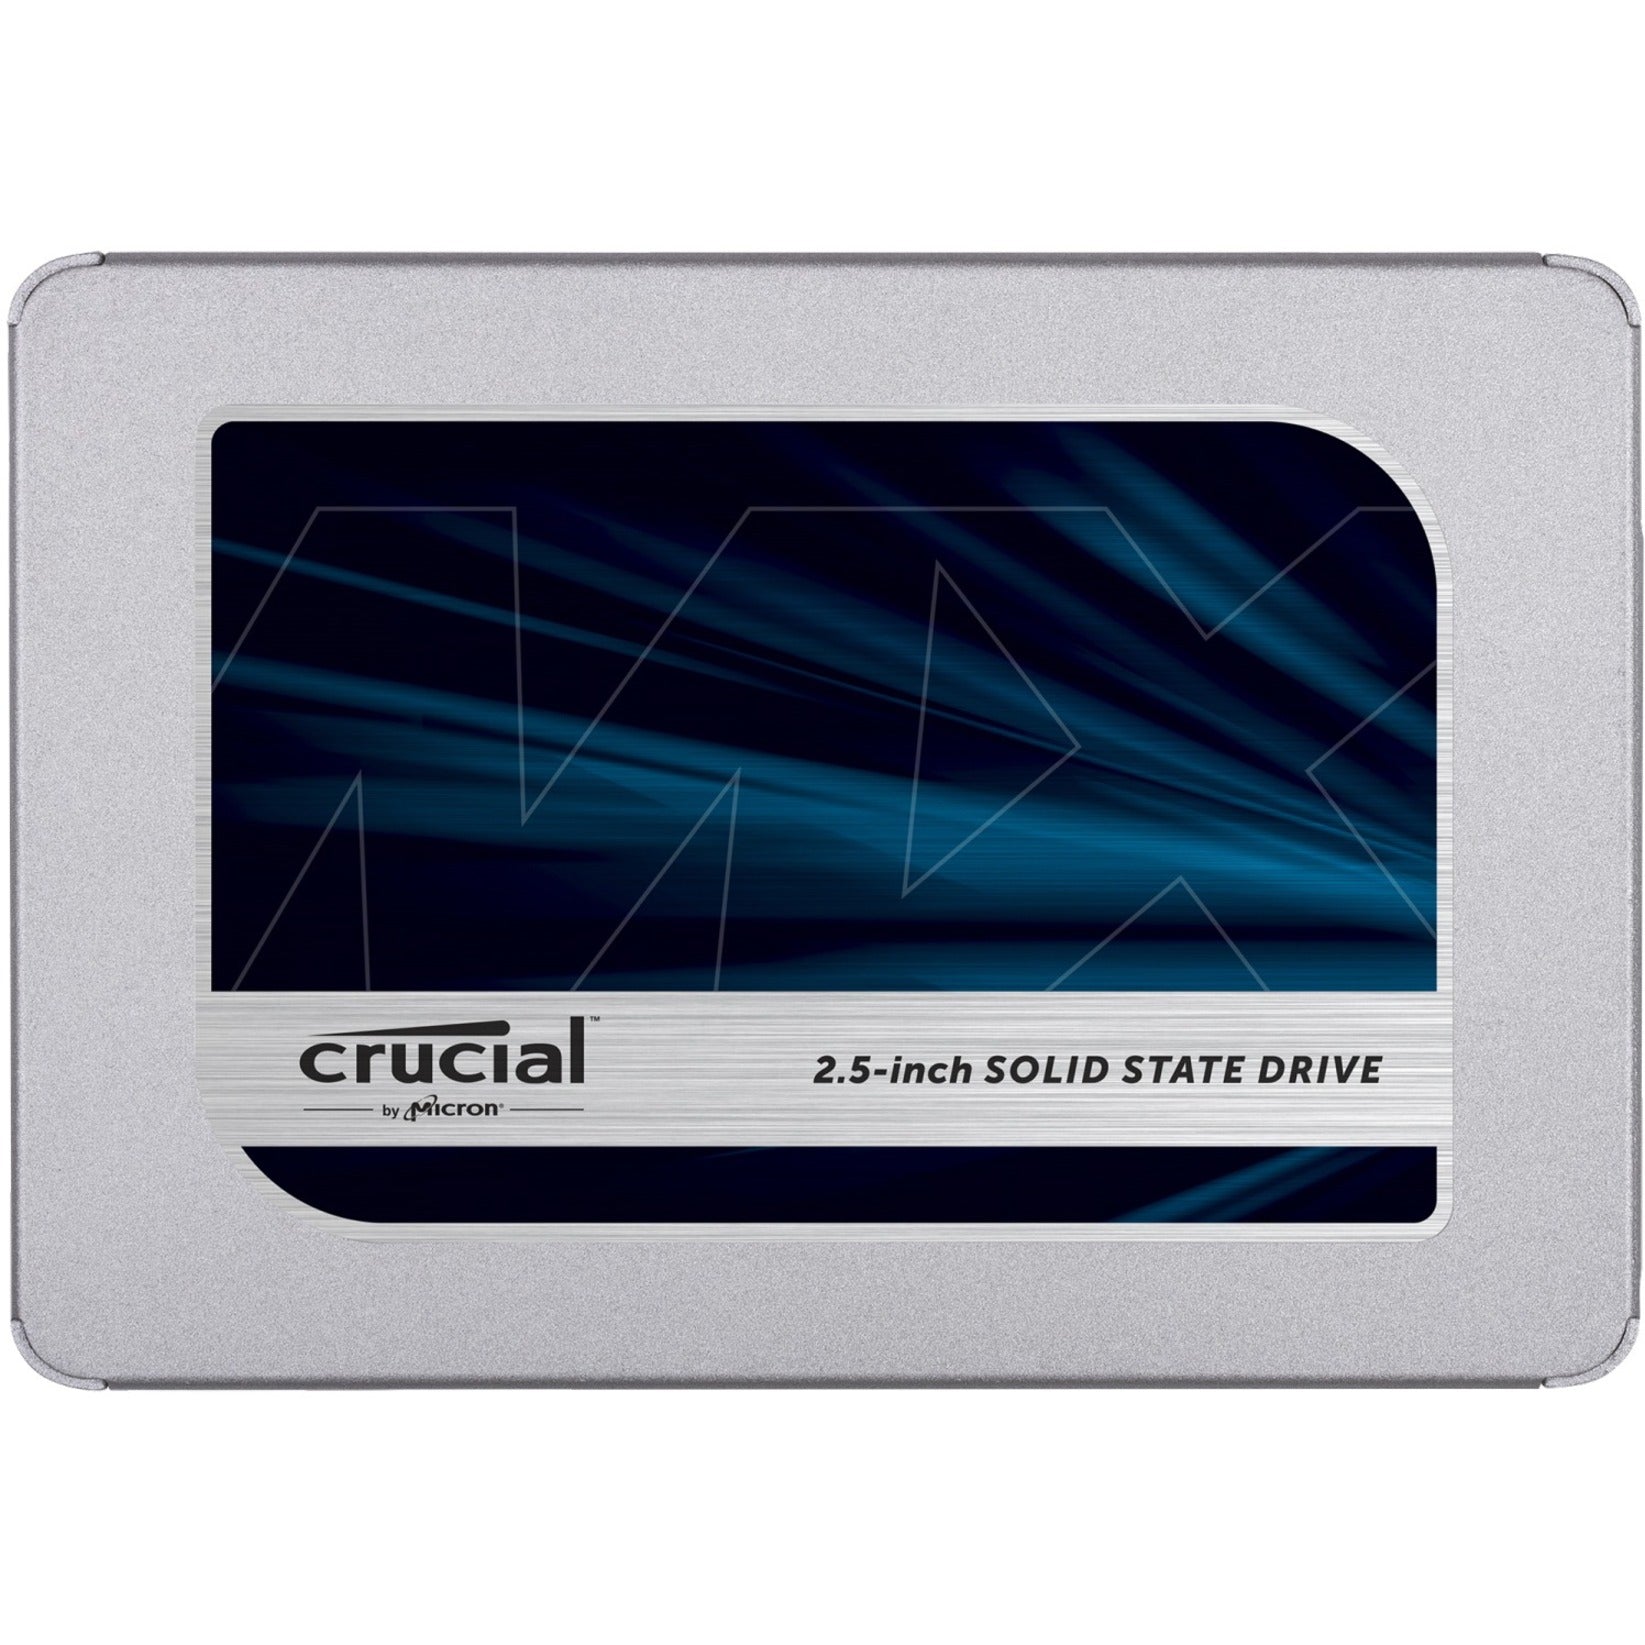 Crucial CT250MX500SSD1 MX500 2.5-inch Solid State Drive, 250GB Storage Capacity, 5 Year Warranty